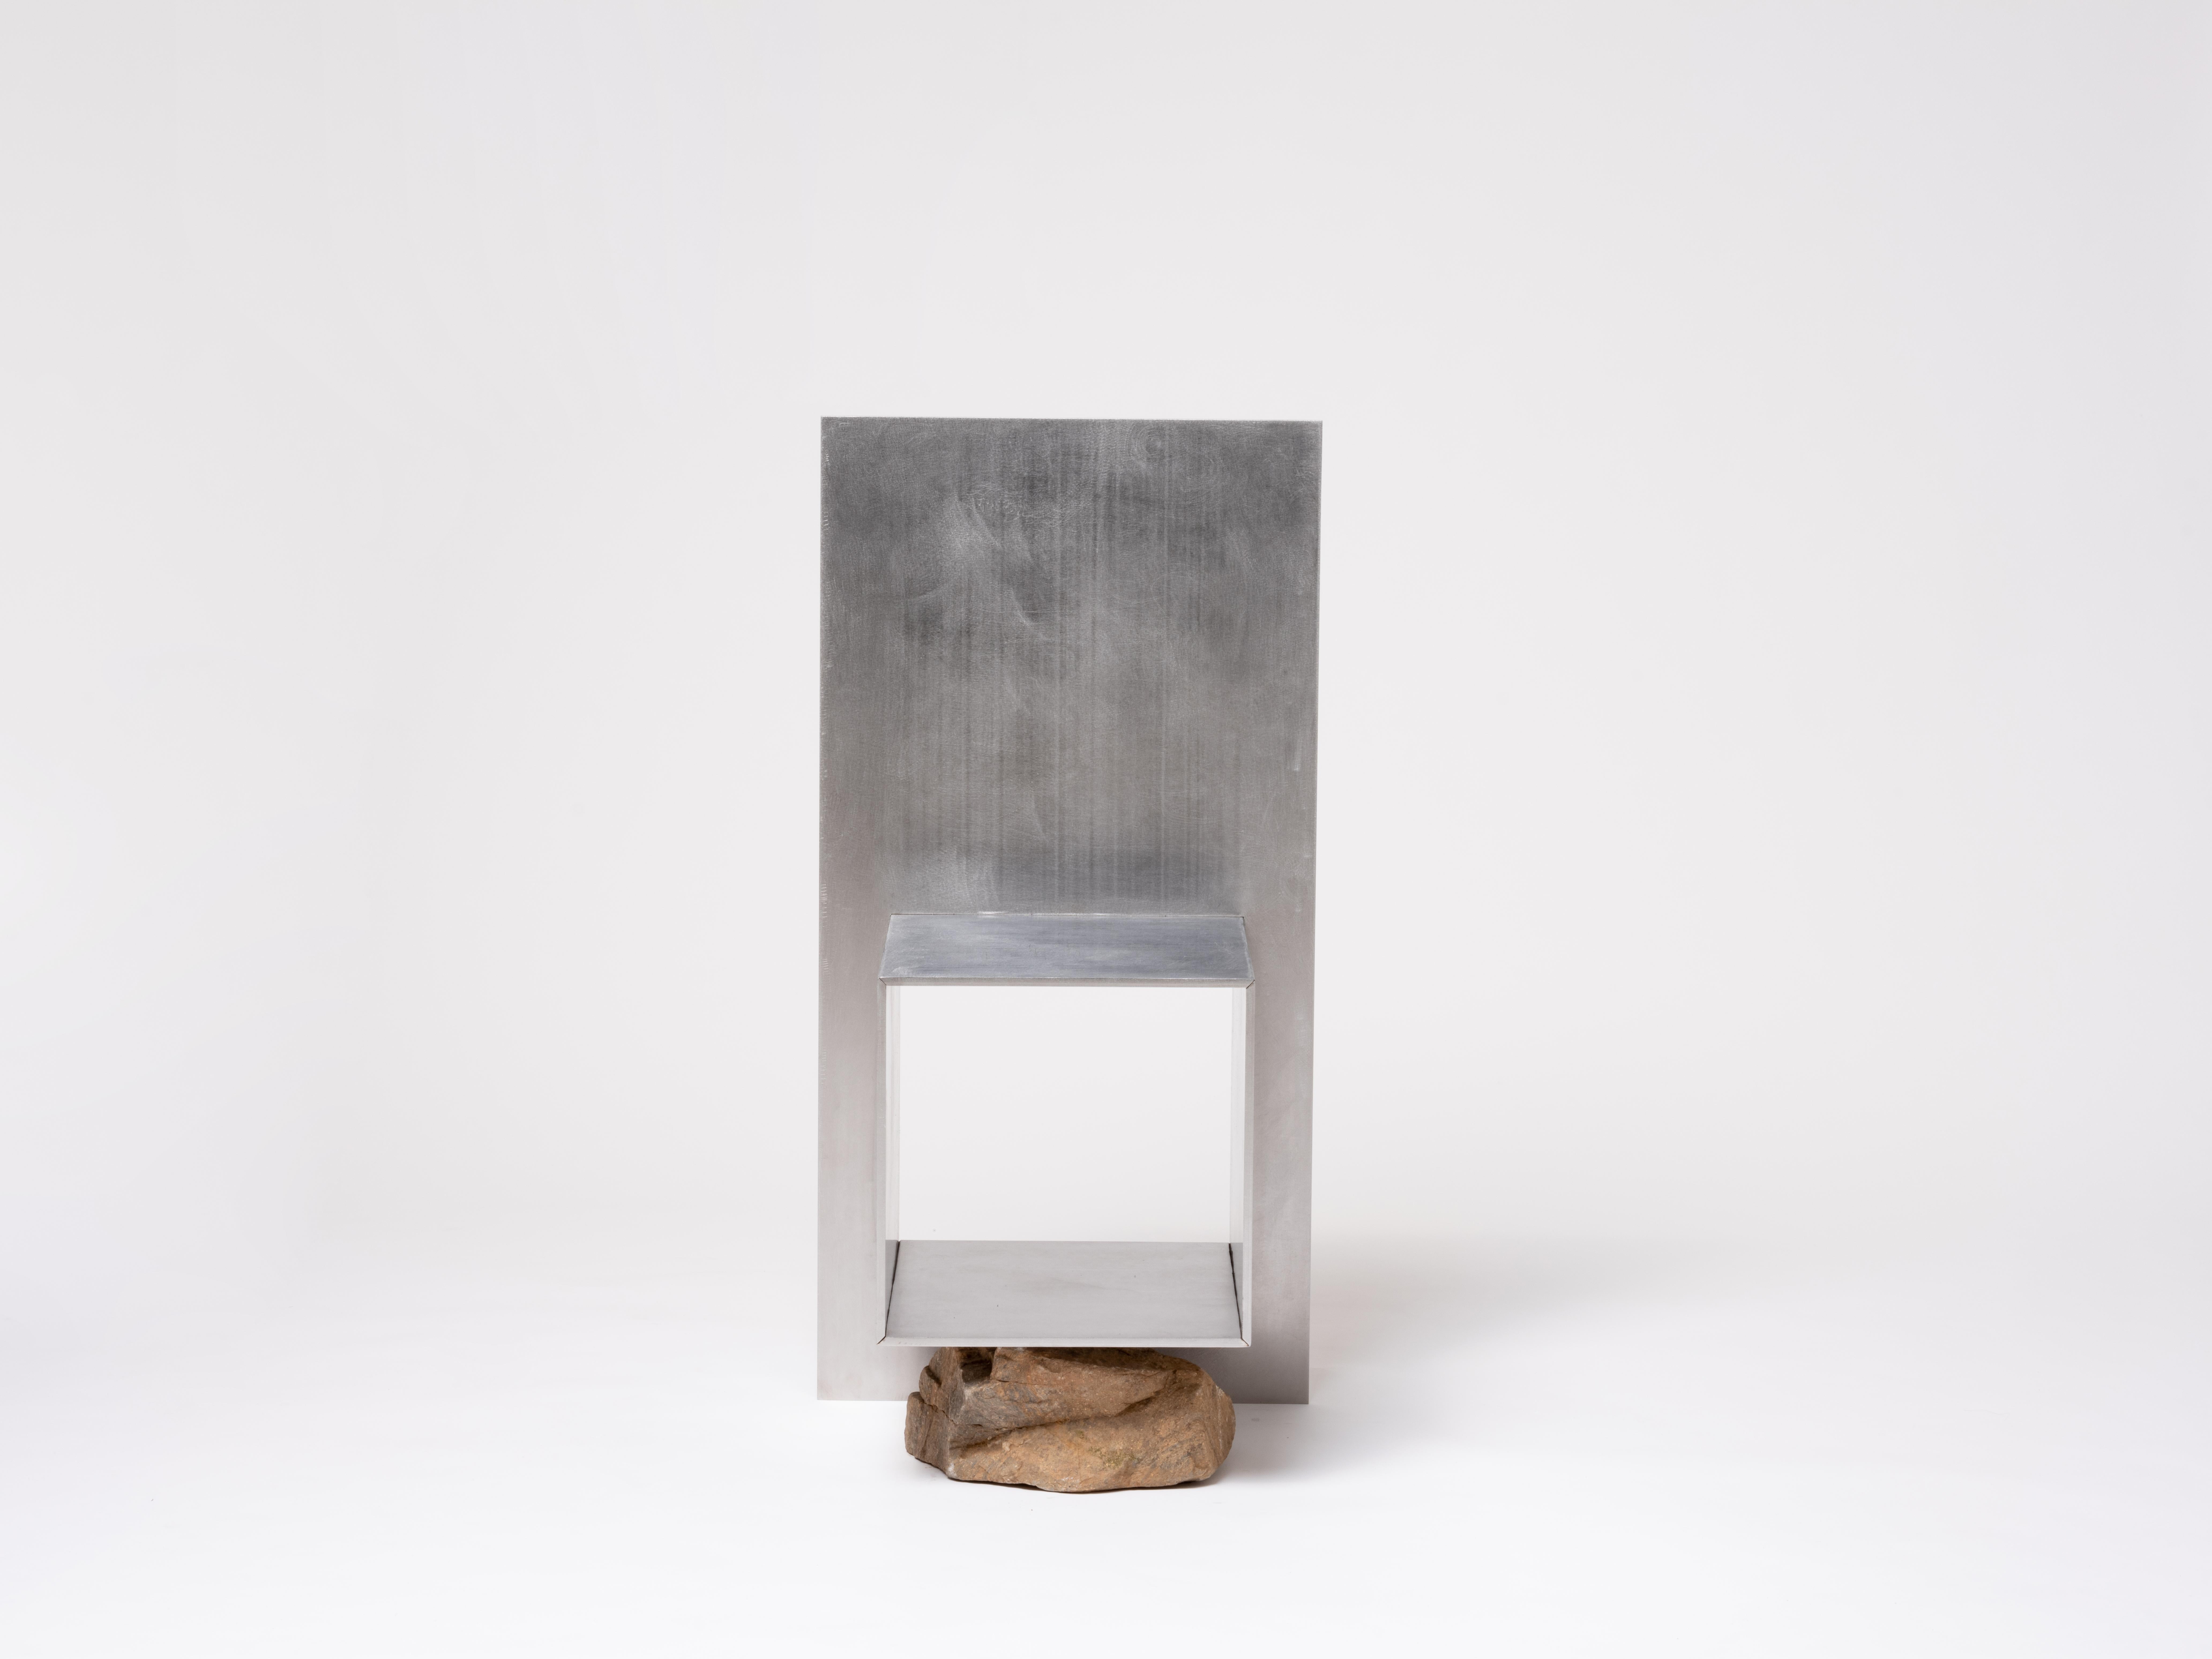 Proportions of stone chair by Lee Sisan
2019
Dimensions: W 45 x D 41 x H 90 cm
Materials: Stainless steel, natural stone

Each piece is made to order and uses natural stones, so please expect some variability in design.

